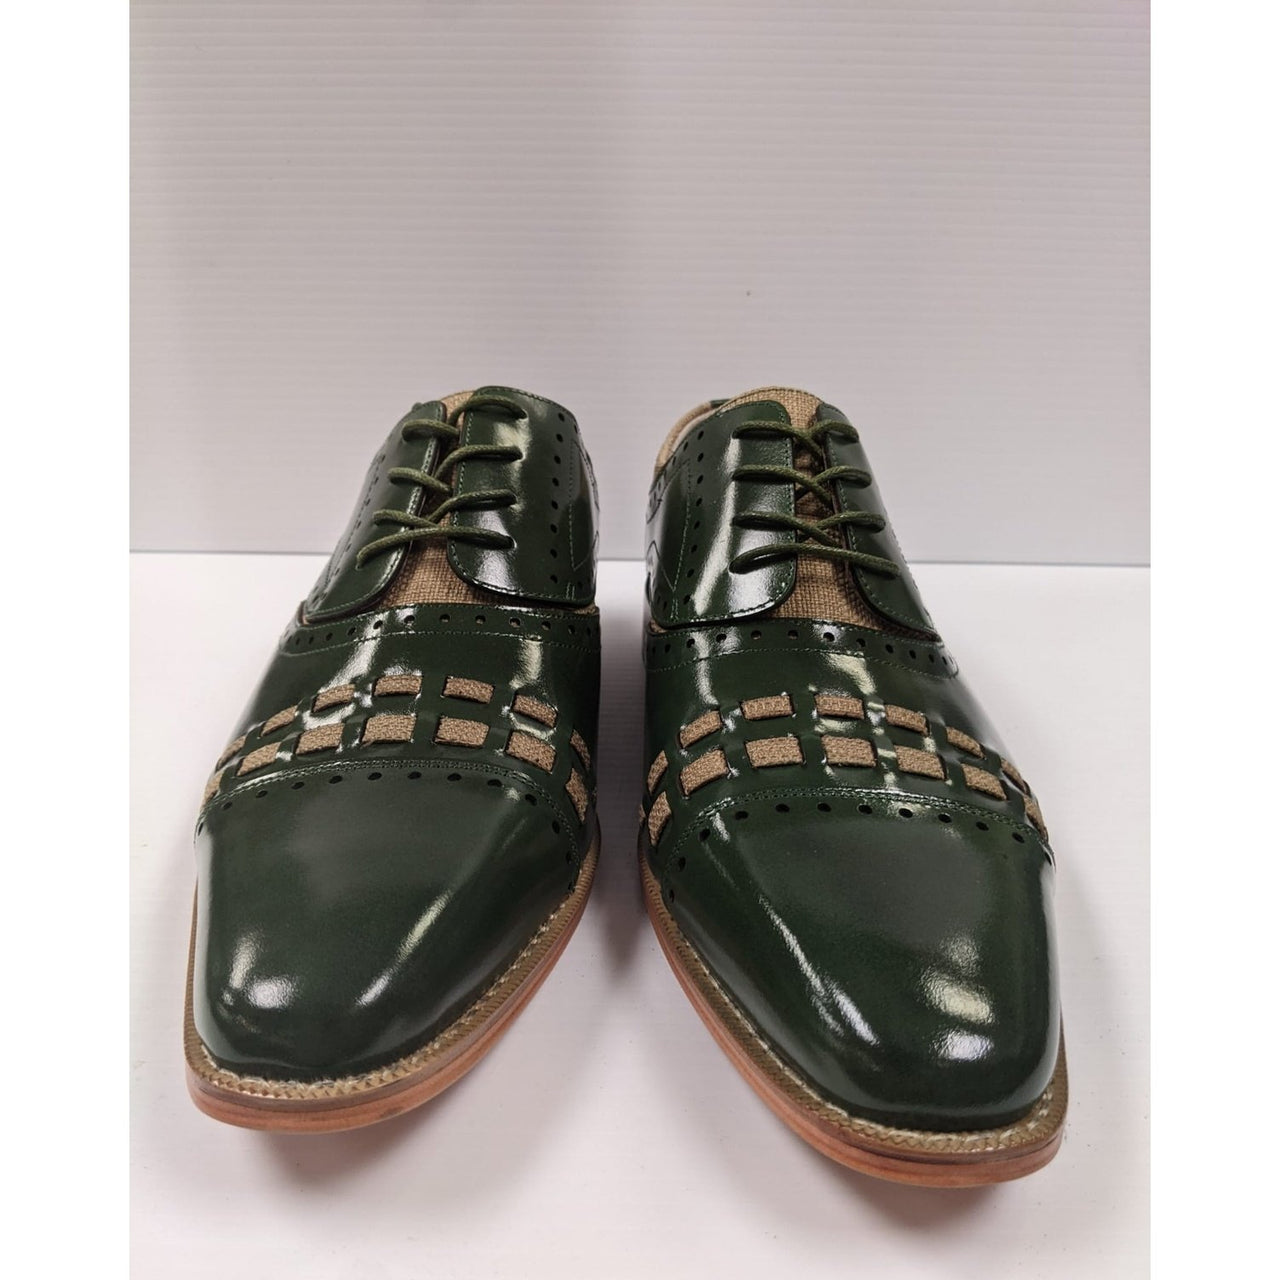 Giovanni SHOES Giovanni Mens Olive Green & Tan 2 Tone Lace-up Oxford Leather Dress Shoes